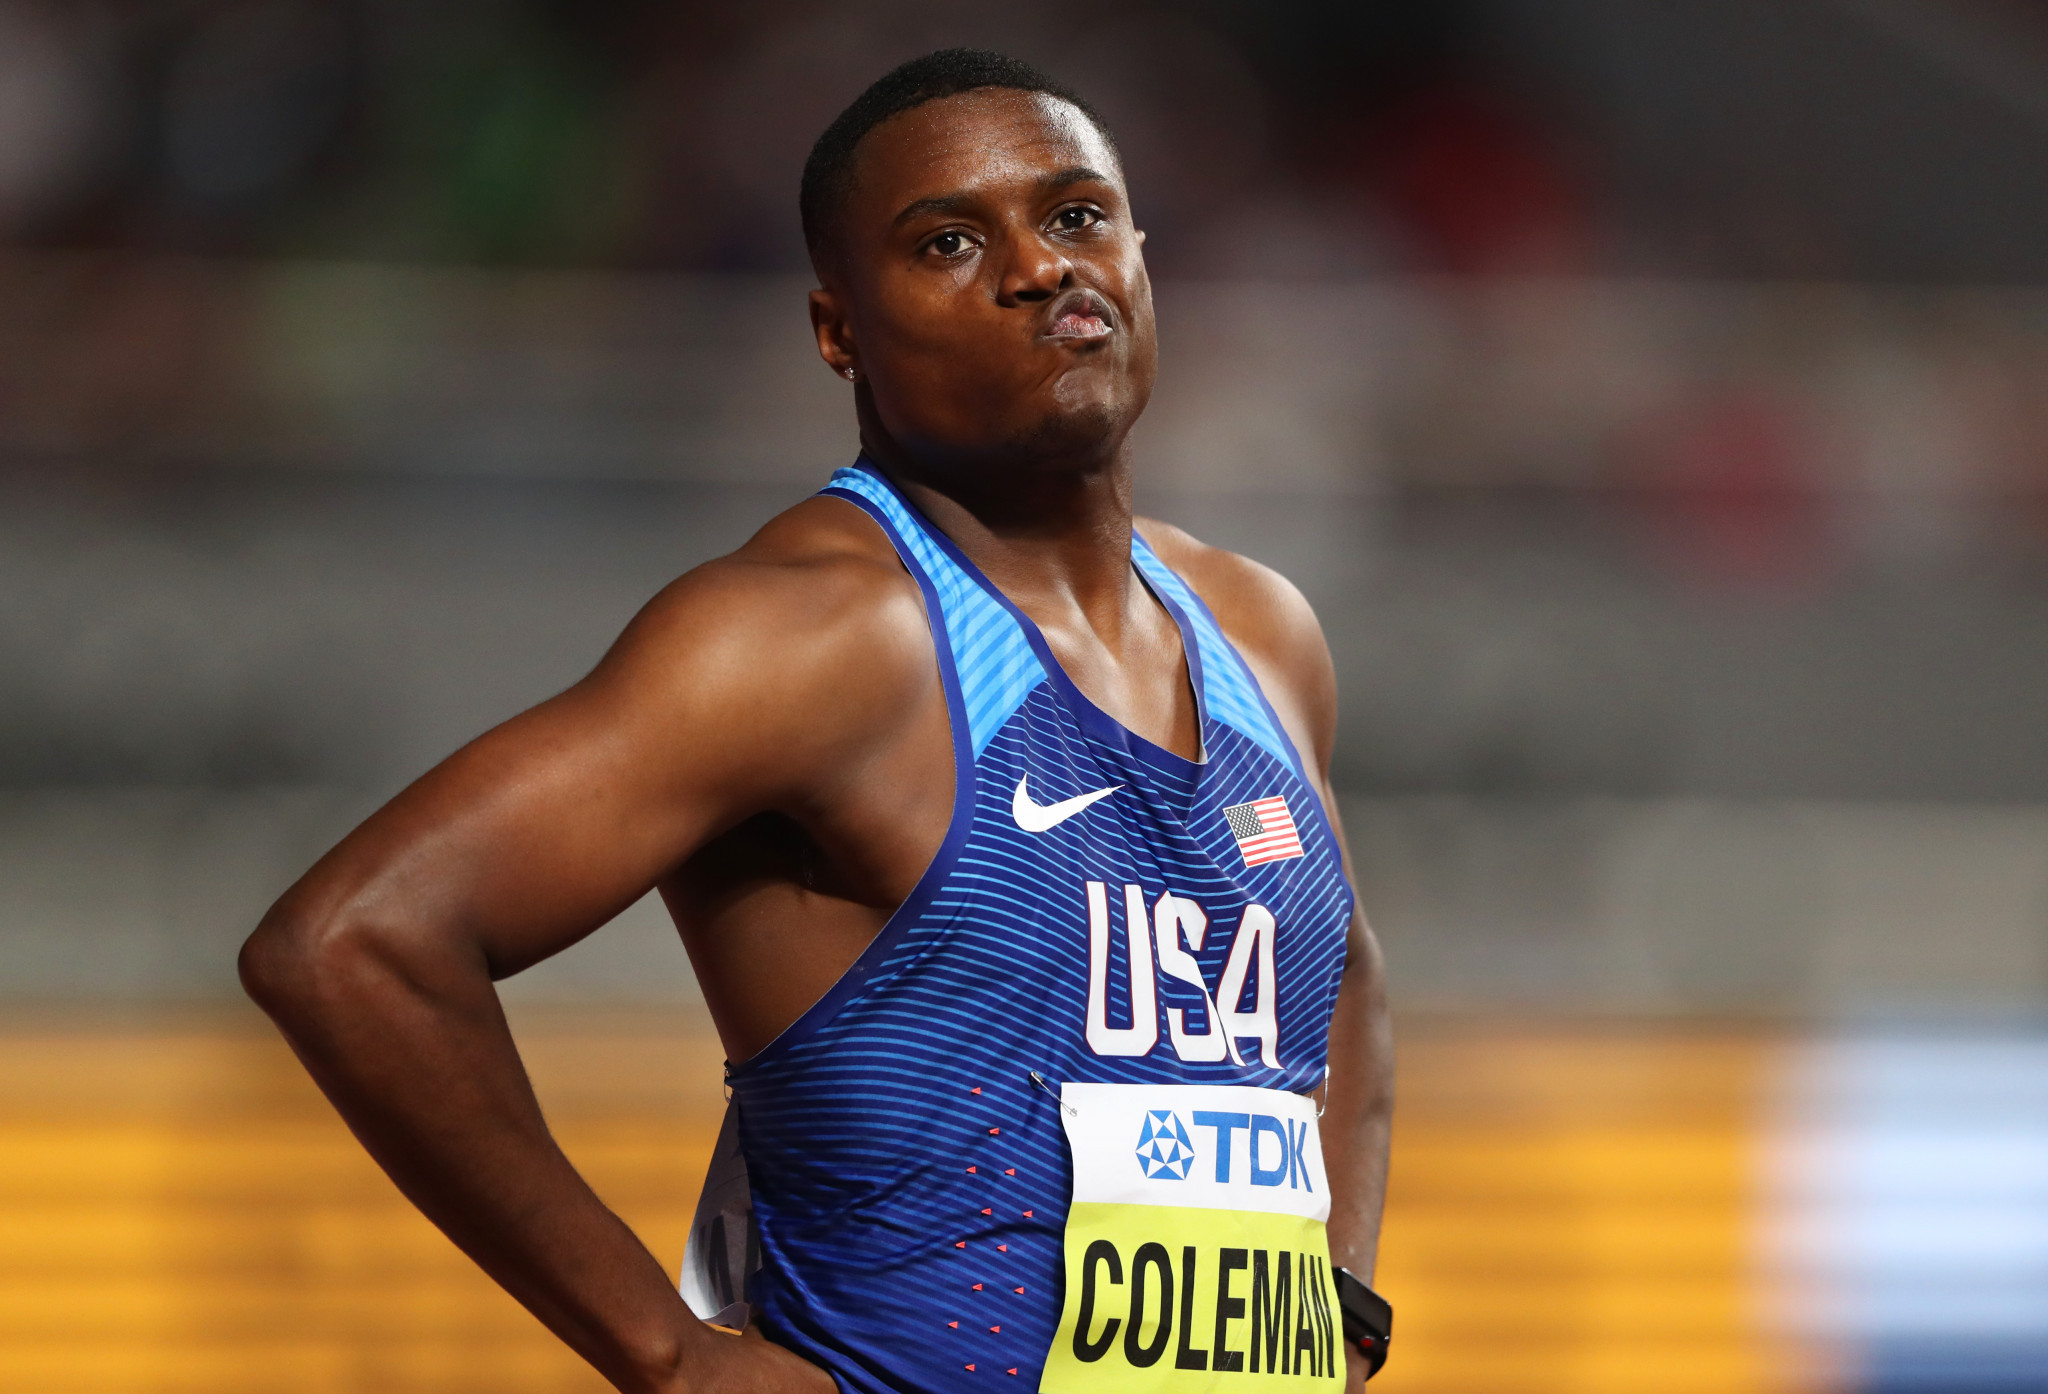 Coleman still out of Olympics as doping ban cut to 18 months